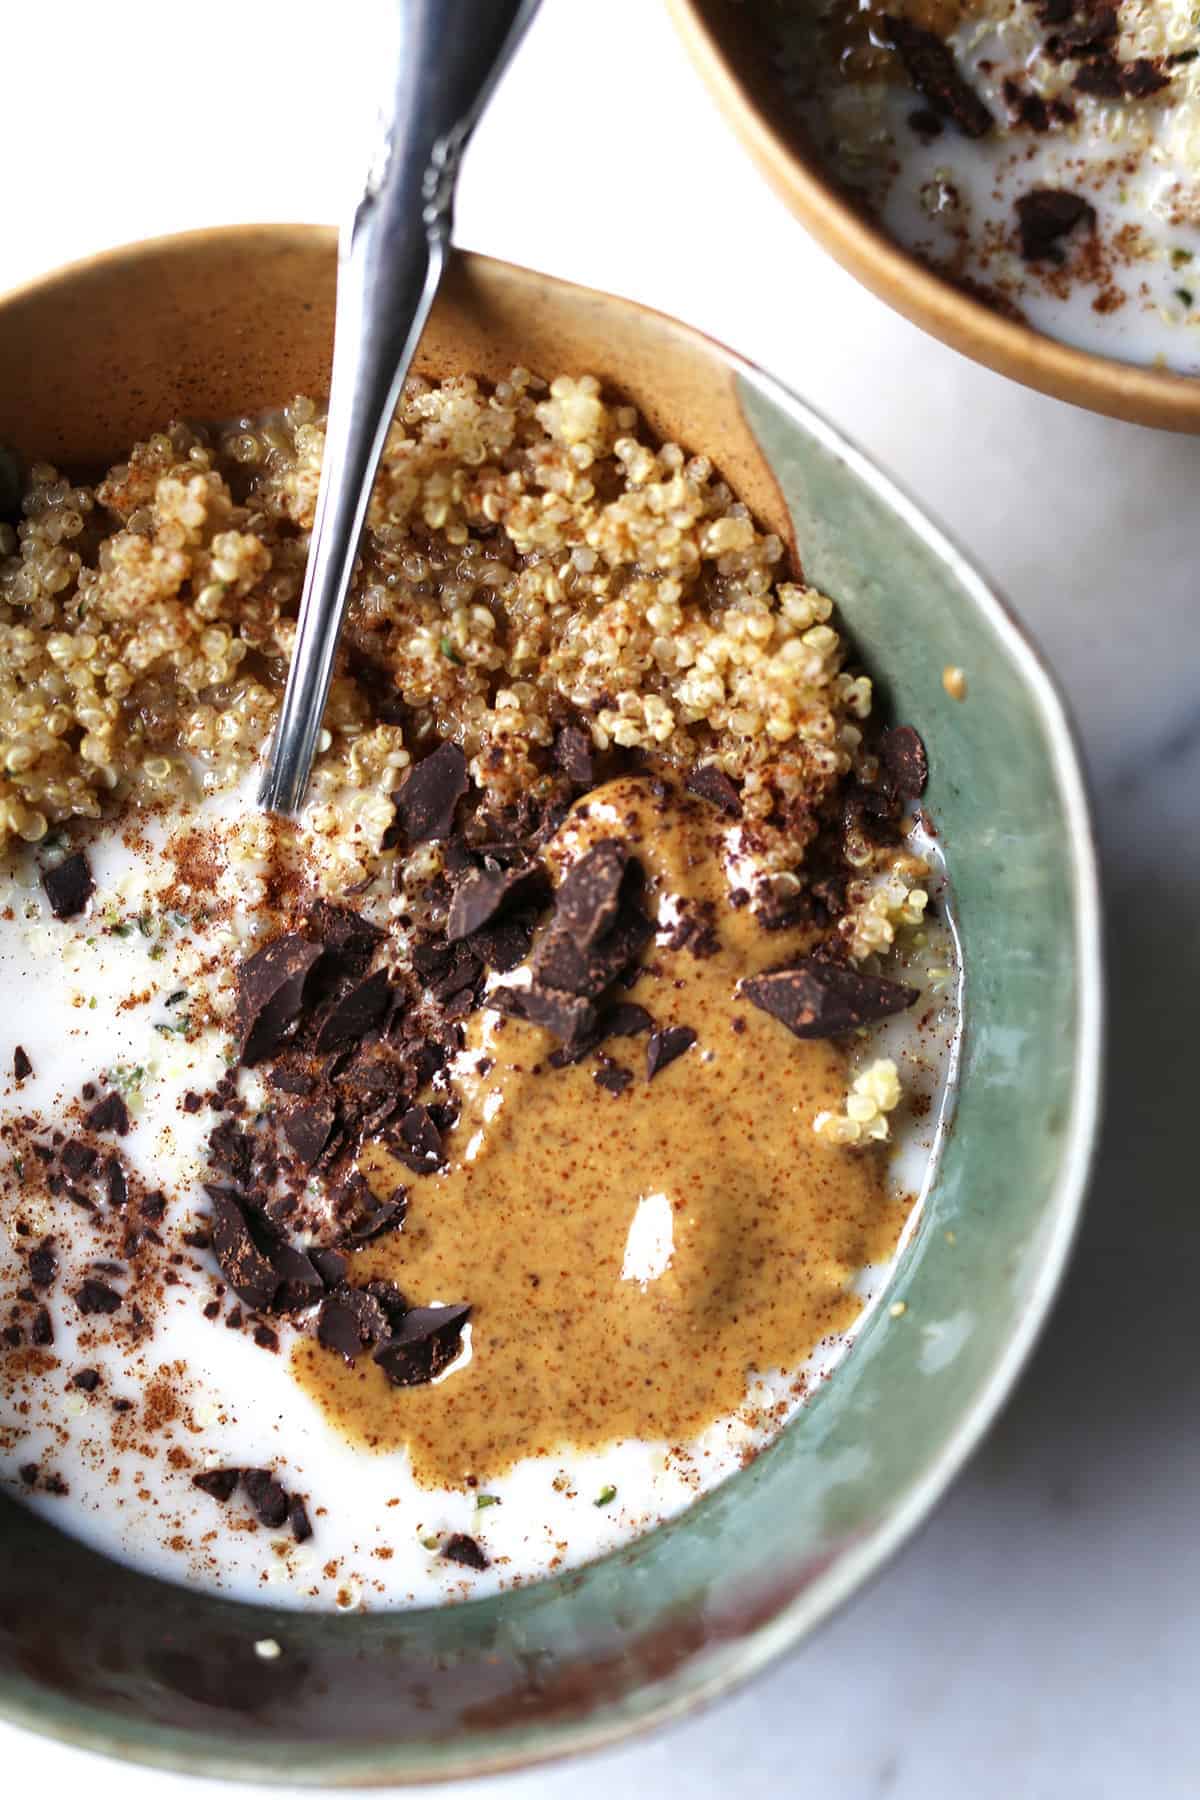 A quinoa breakfast bowl topped cacao nibs and nut butter with a spoon in the bowl.